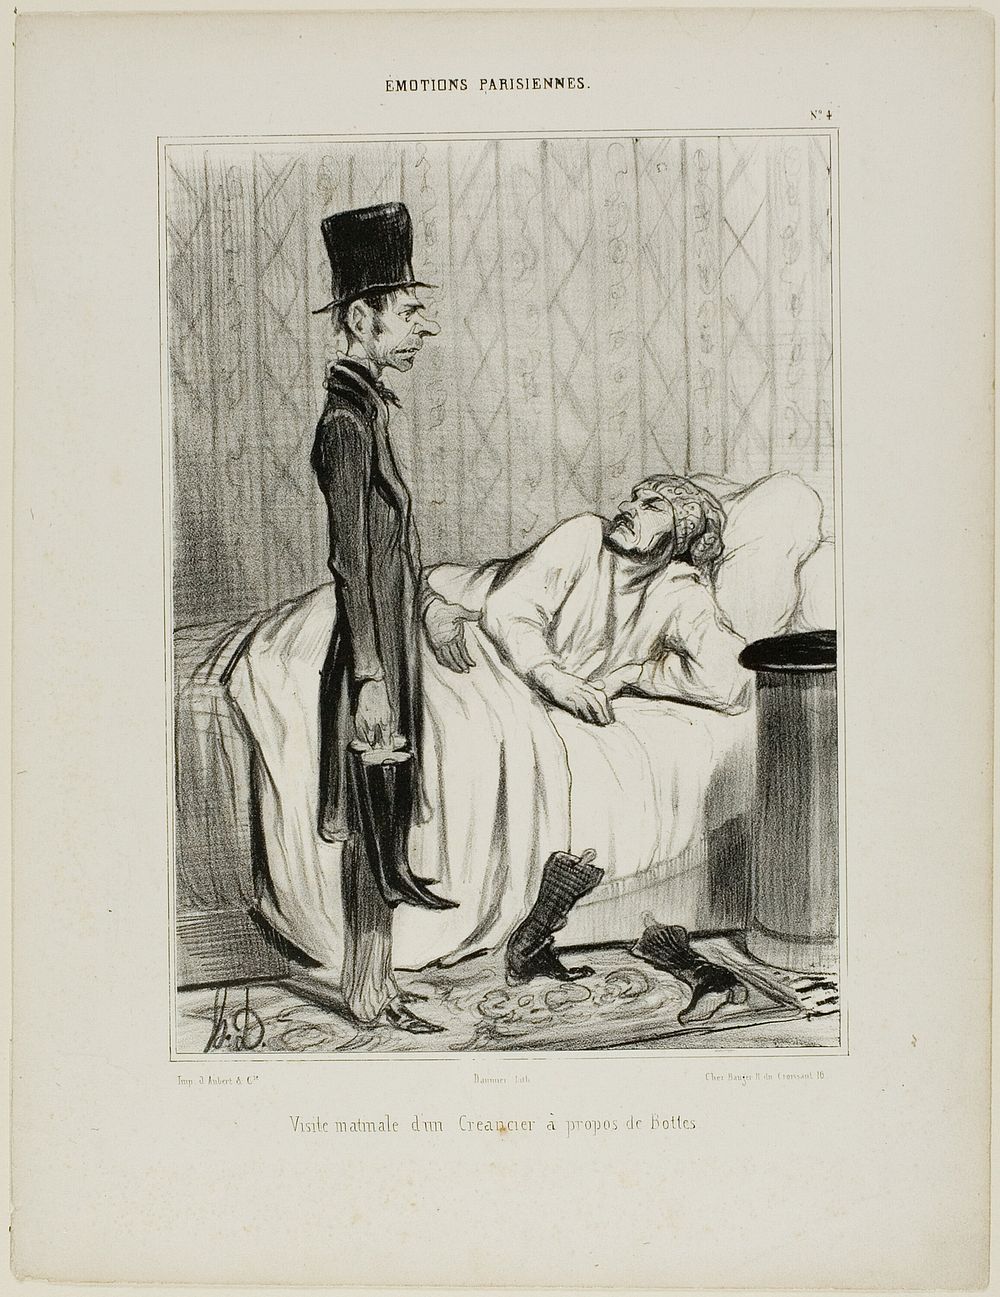 Early morning visit of a creditor concerning the boots, plate 4 from Émotions Parisiennes by Honoré-Victorin Daumier